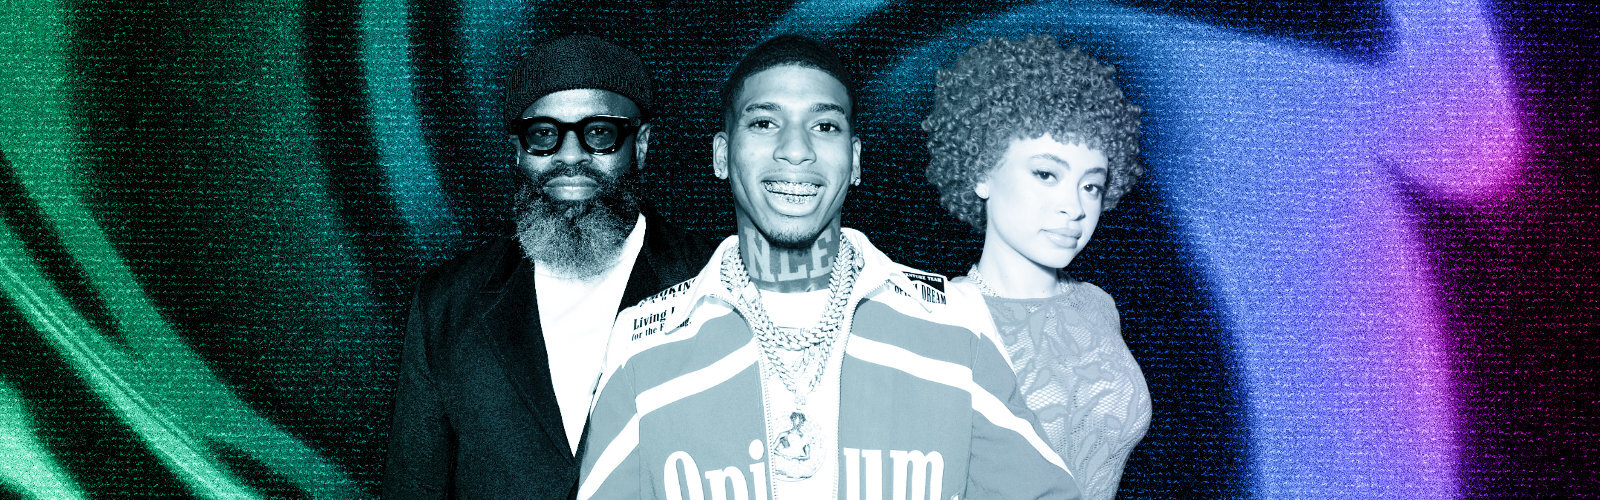 best-new-hip-hop-this-week-black-thought-ice-spice-nle-choppa